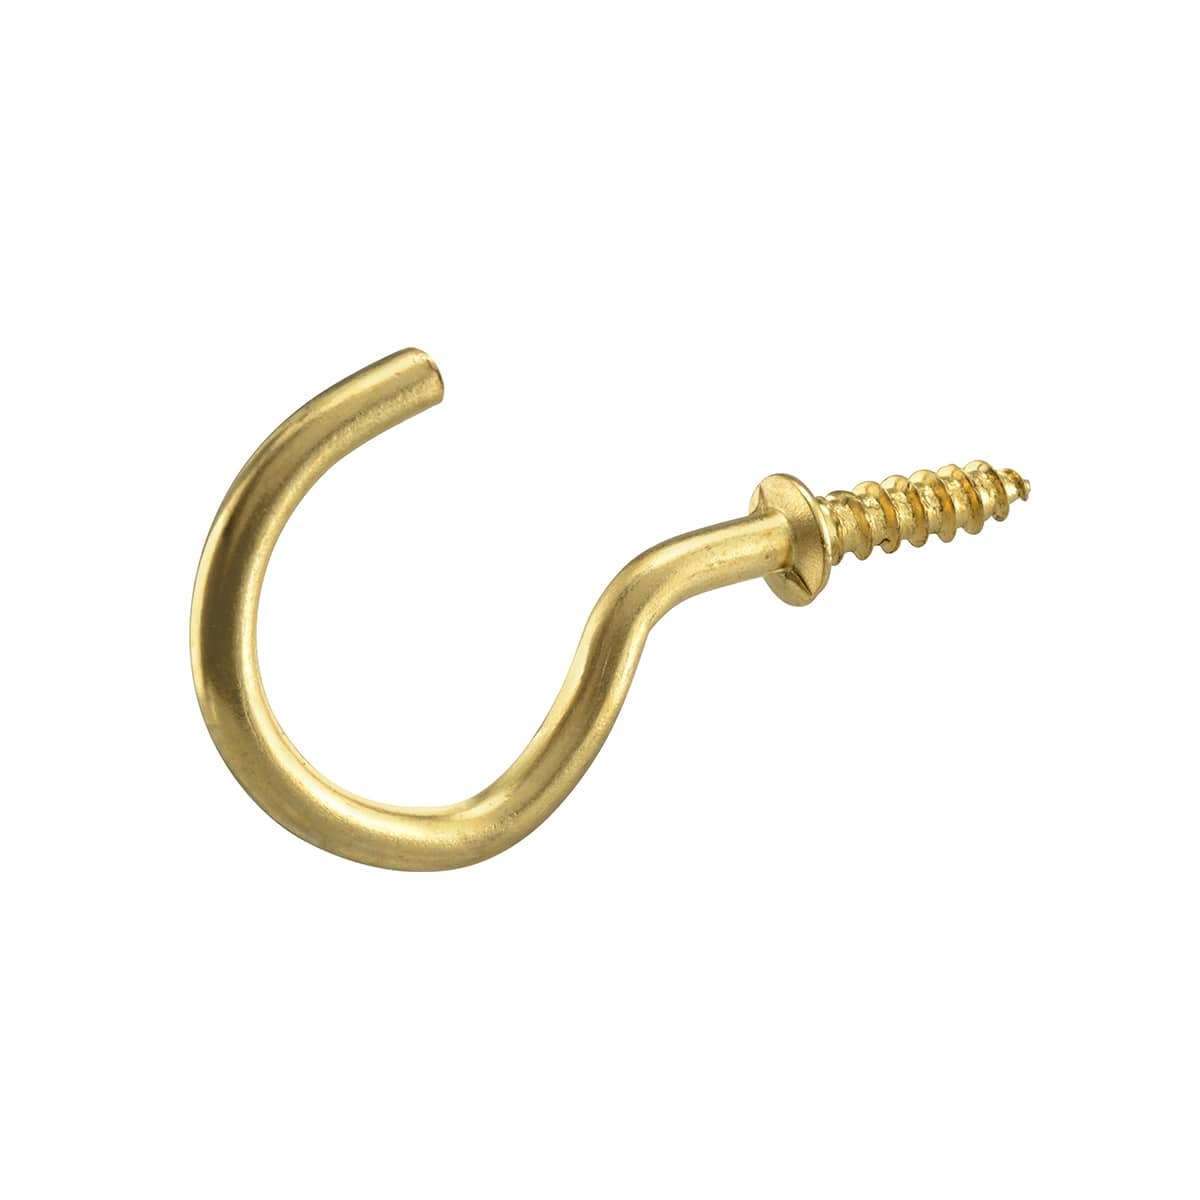 X-HOOKS No.1 Small Brass Plated Picture Hooks (Pack of 50)